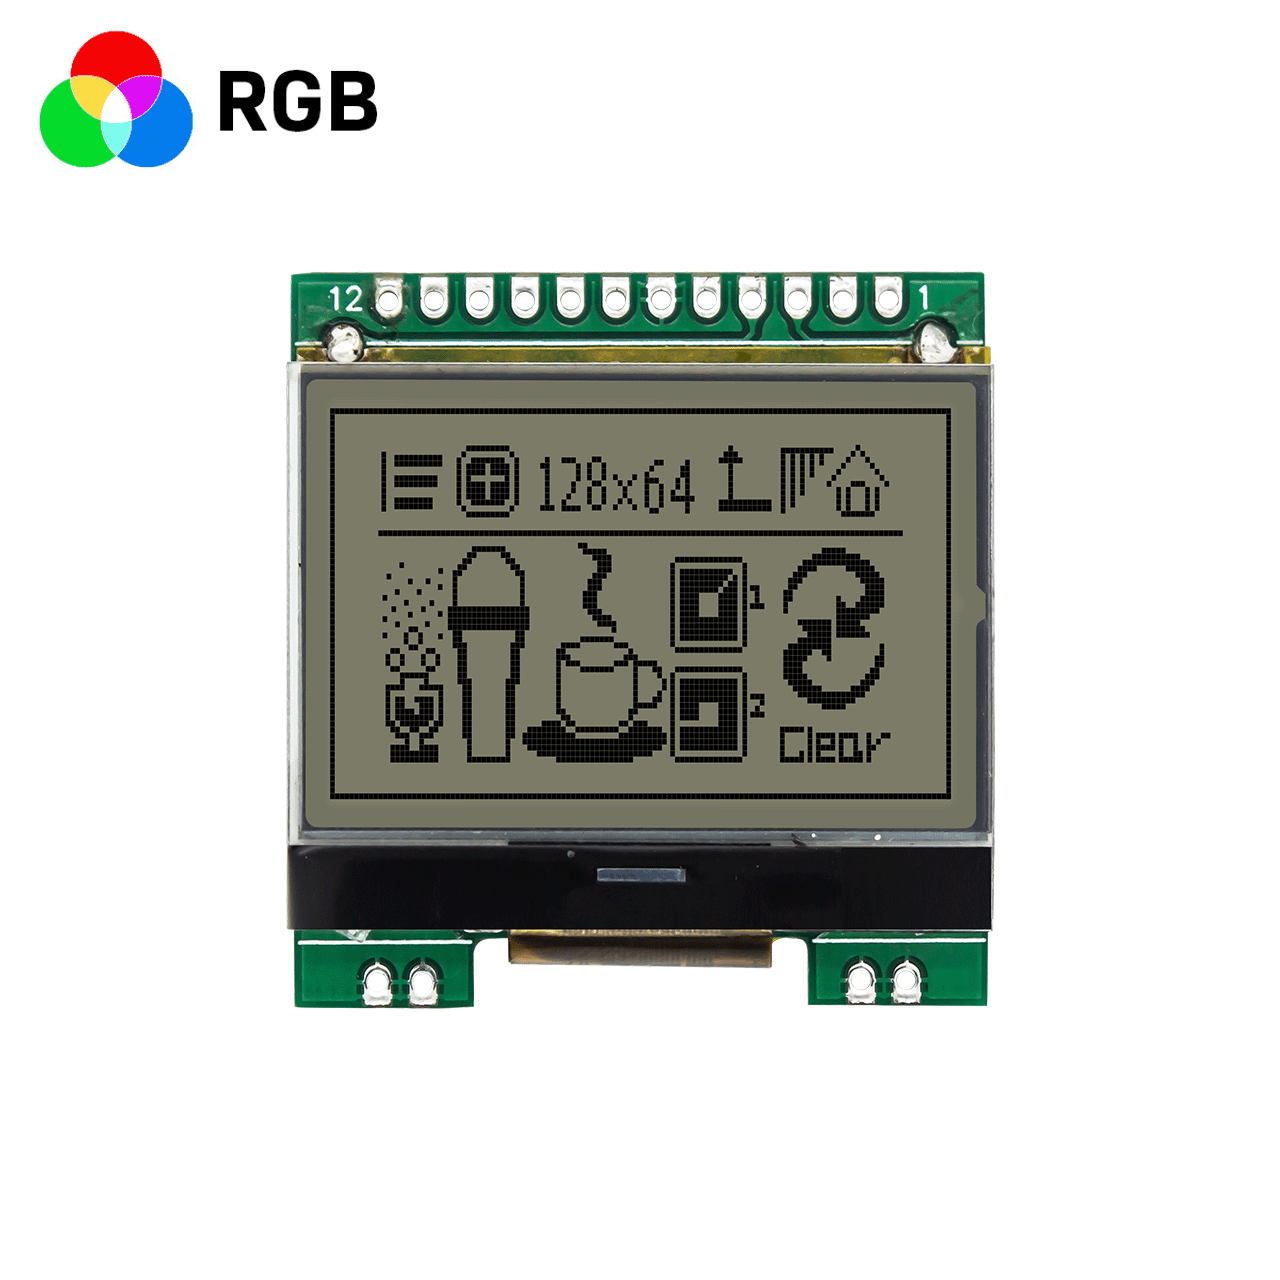 1.7-inch graphic dot matrix module/128x64 resolution/RGB red, green and blue backlight/ST7567 control chip/SPI